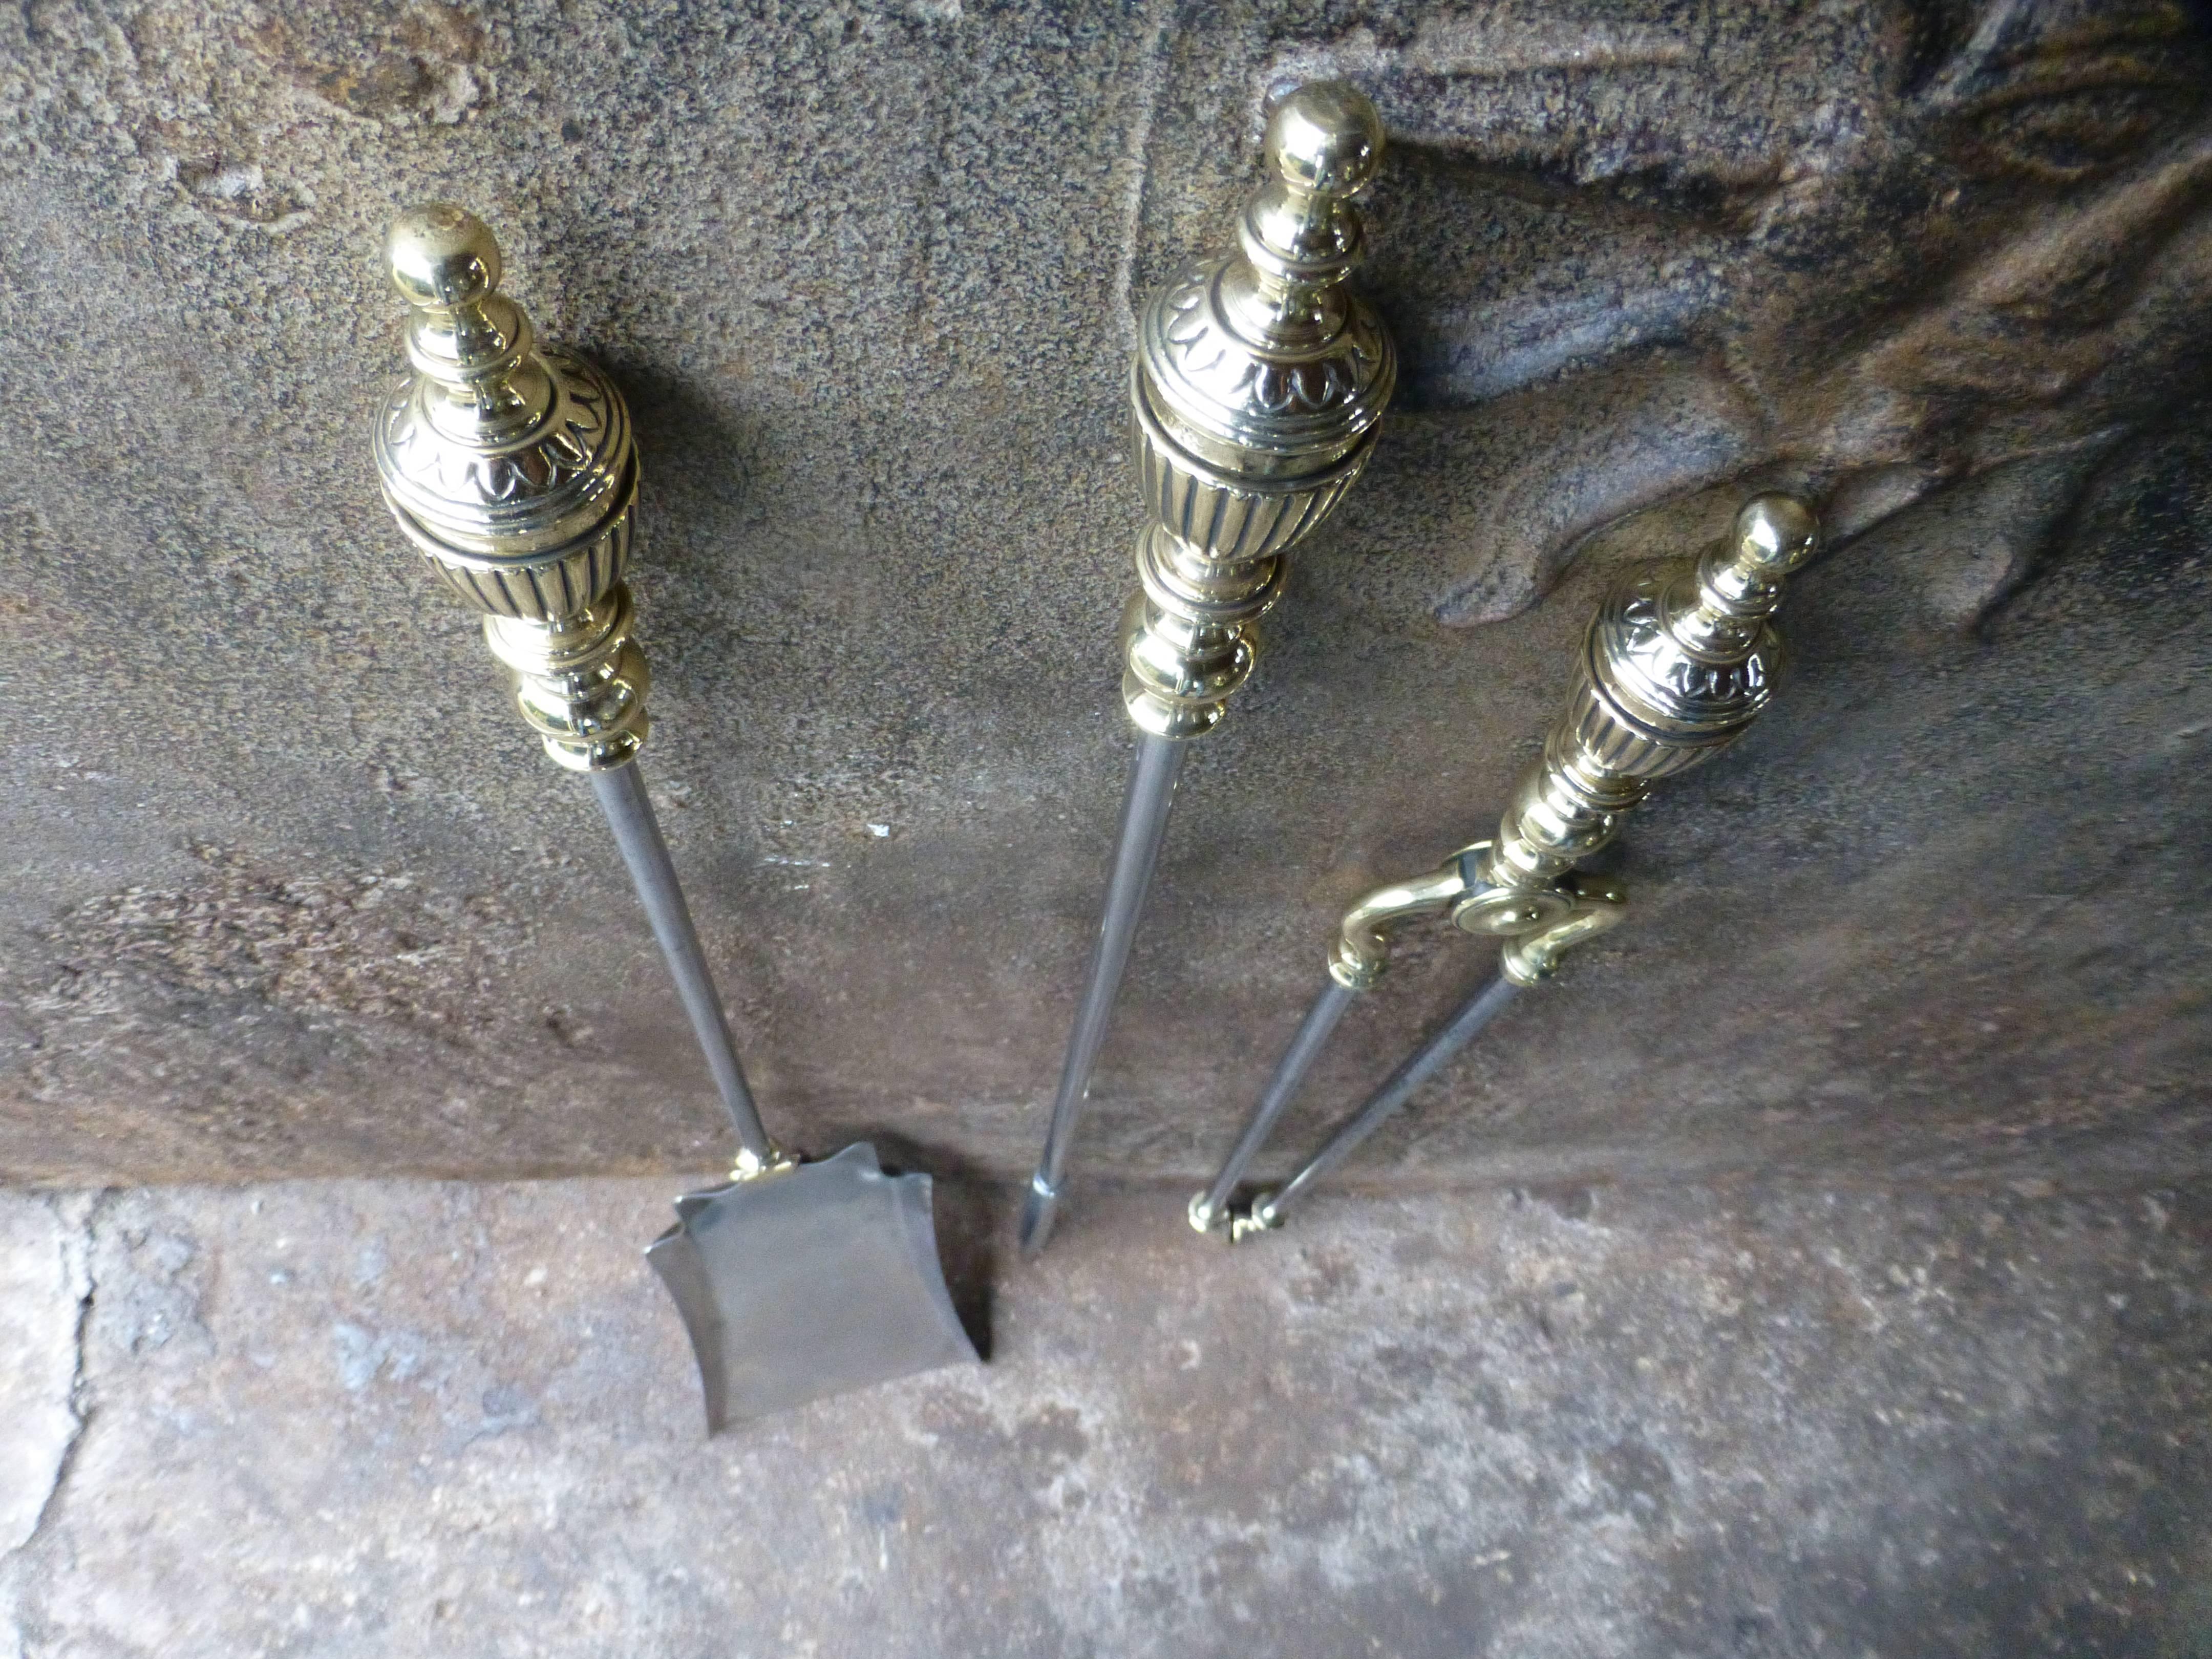 Forged 19th Century English Fireplace Toolset or Fireplace Tools